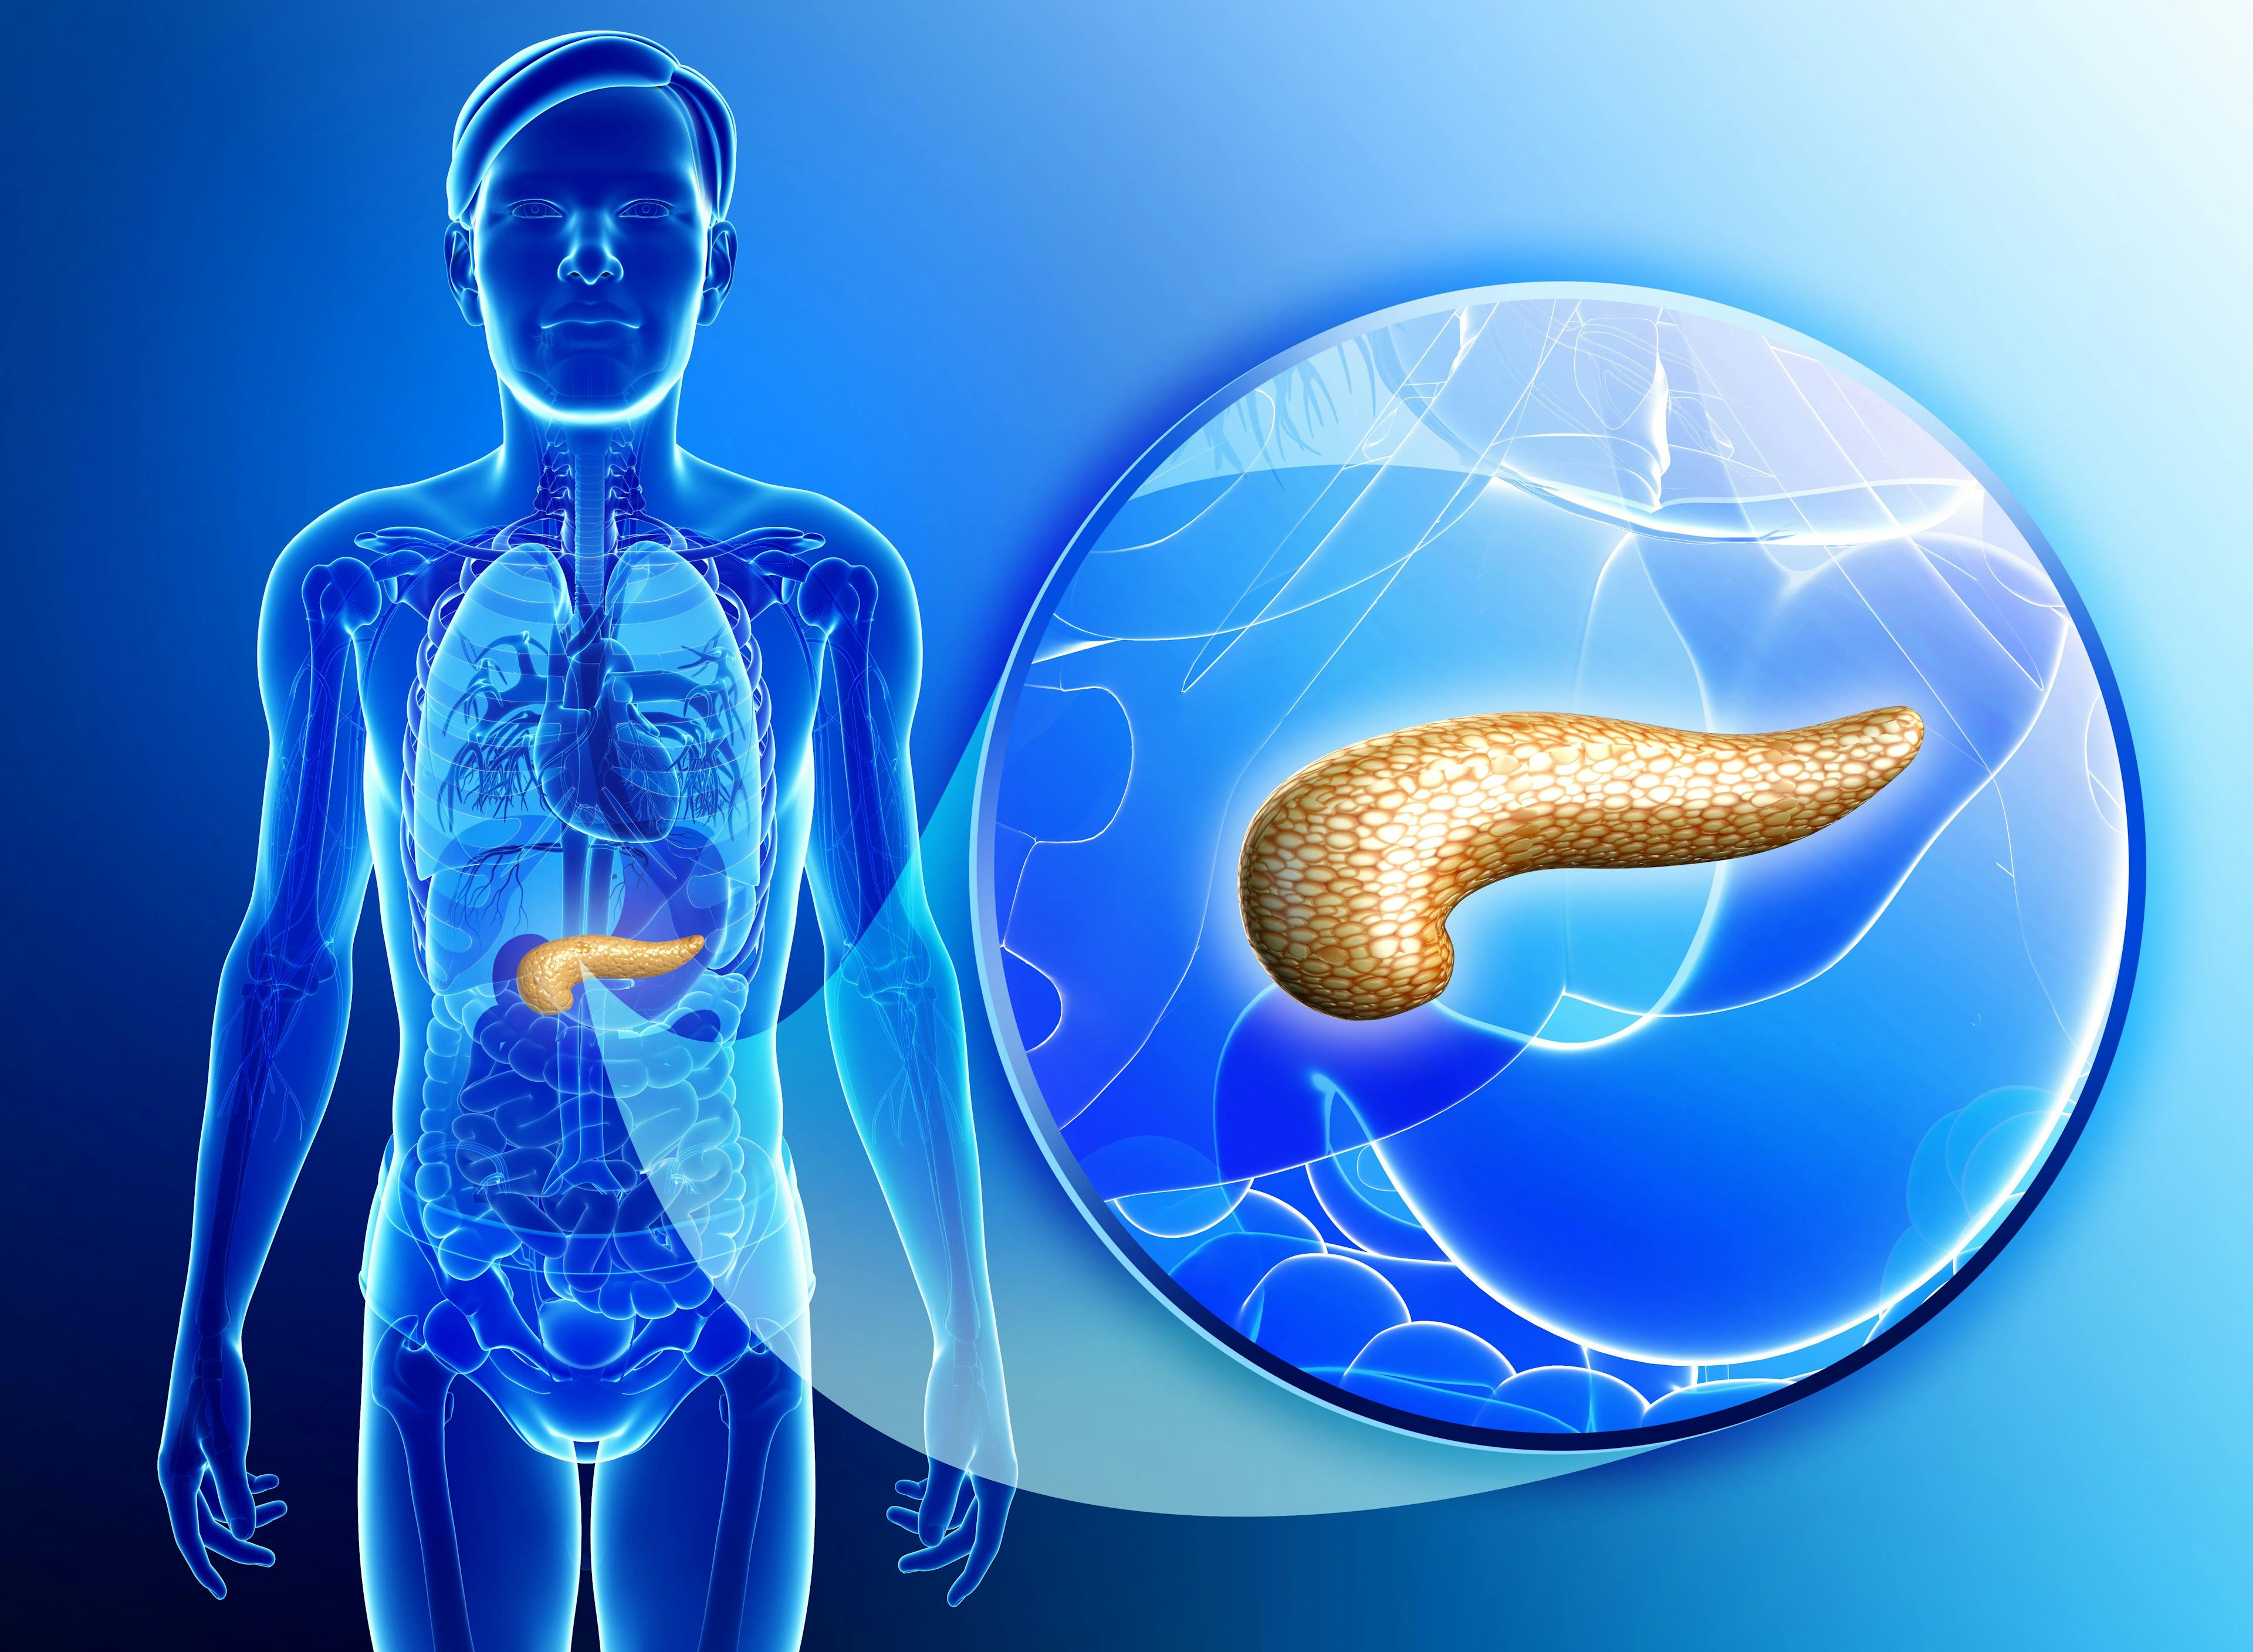 Fully Artificial Pancreas Falls Short of Achieving Noninferiority to Hybrid System, but Shows Promise